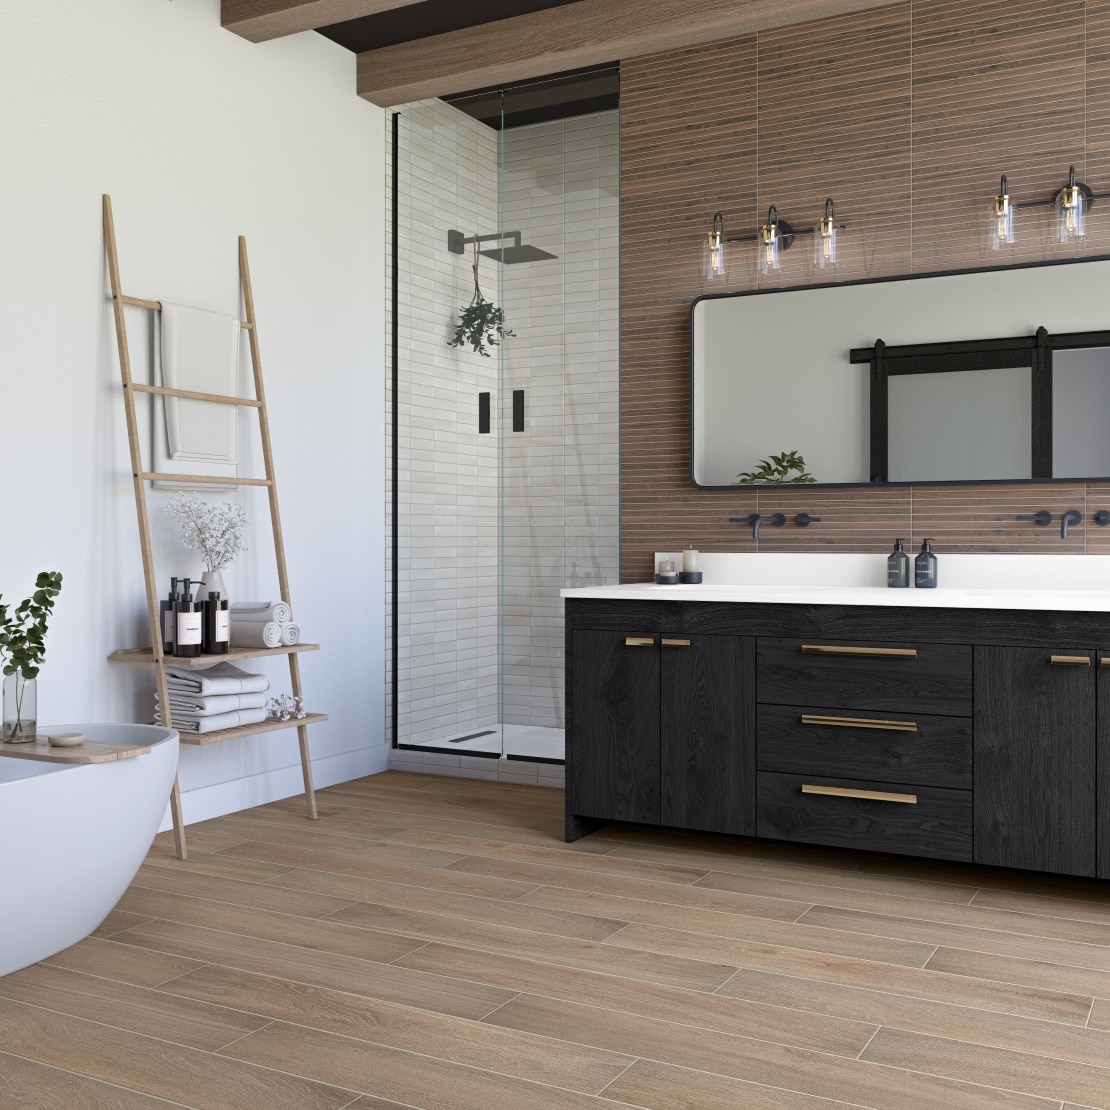 Large bathroom with wooden accents and a walk-in shower.